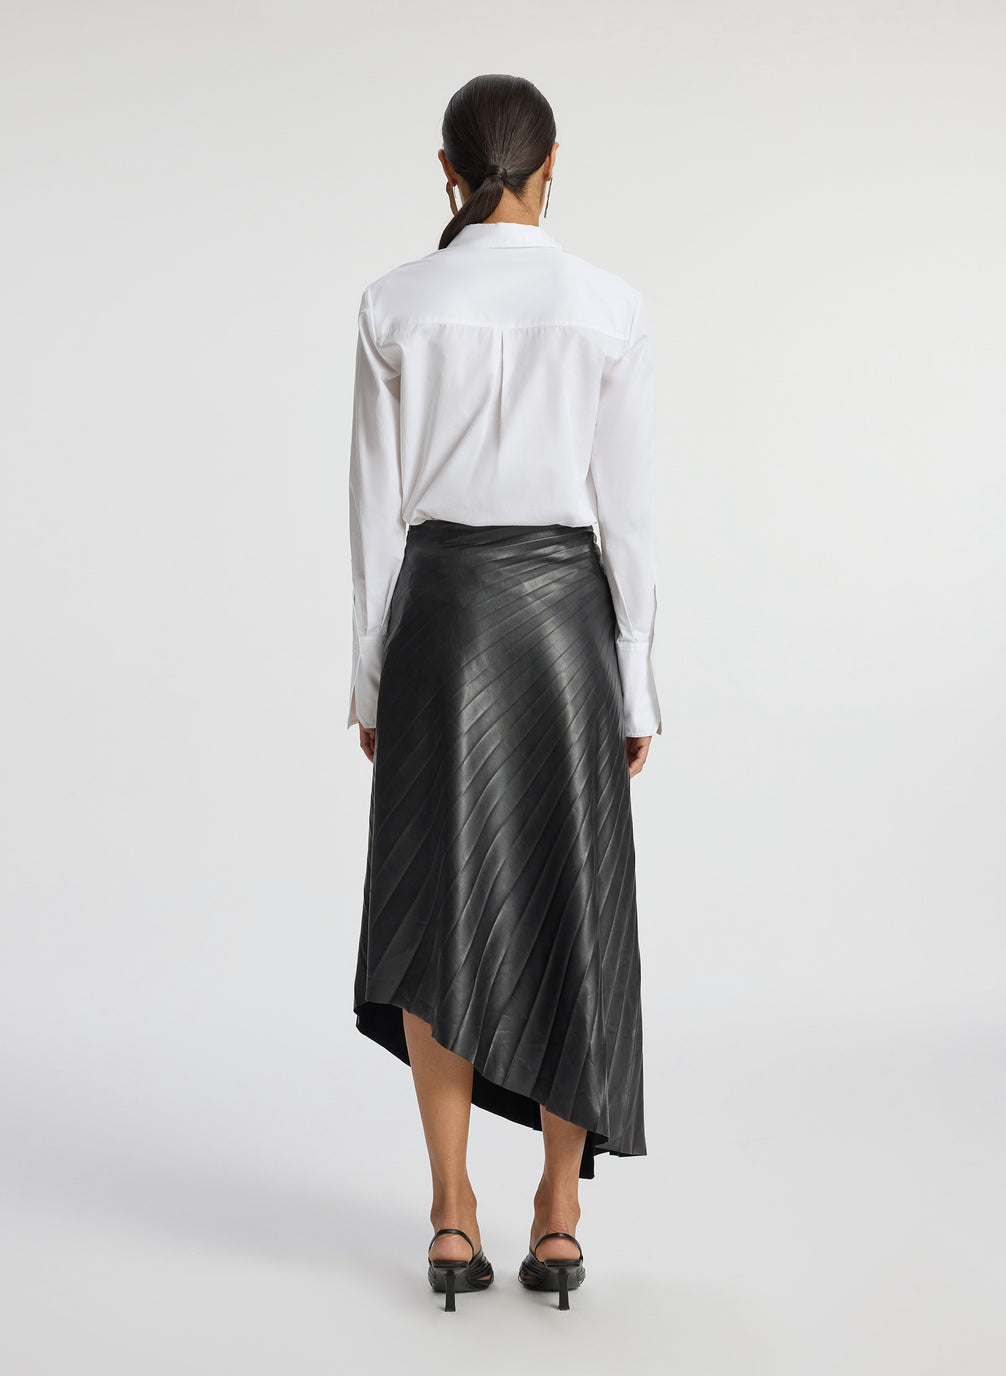 back view of woman wearing white button down top and black pleated vegan leather skirt